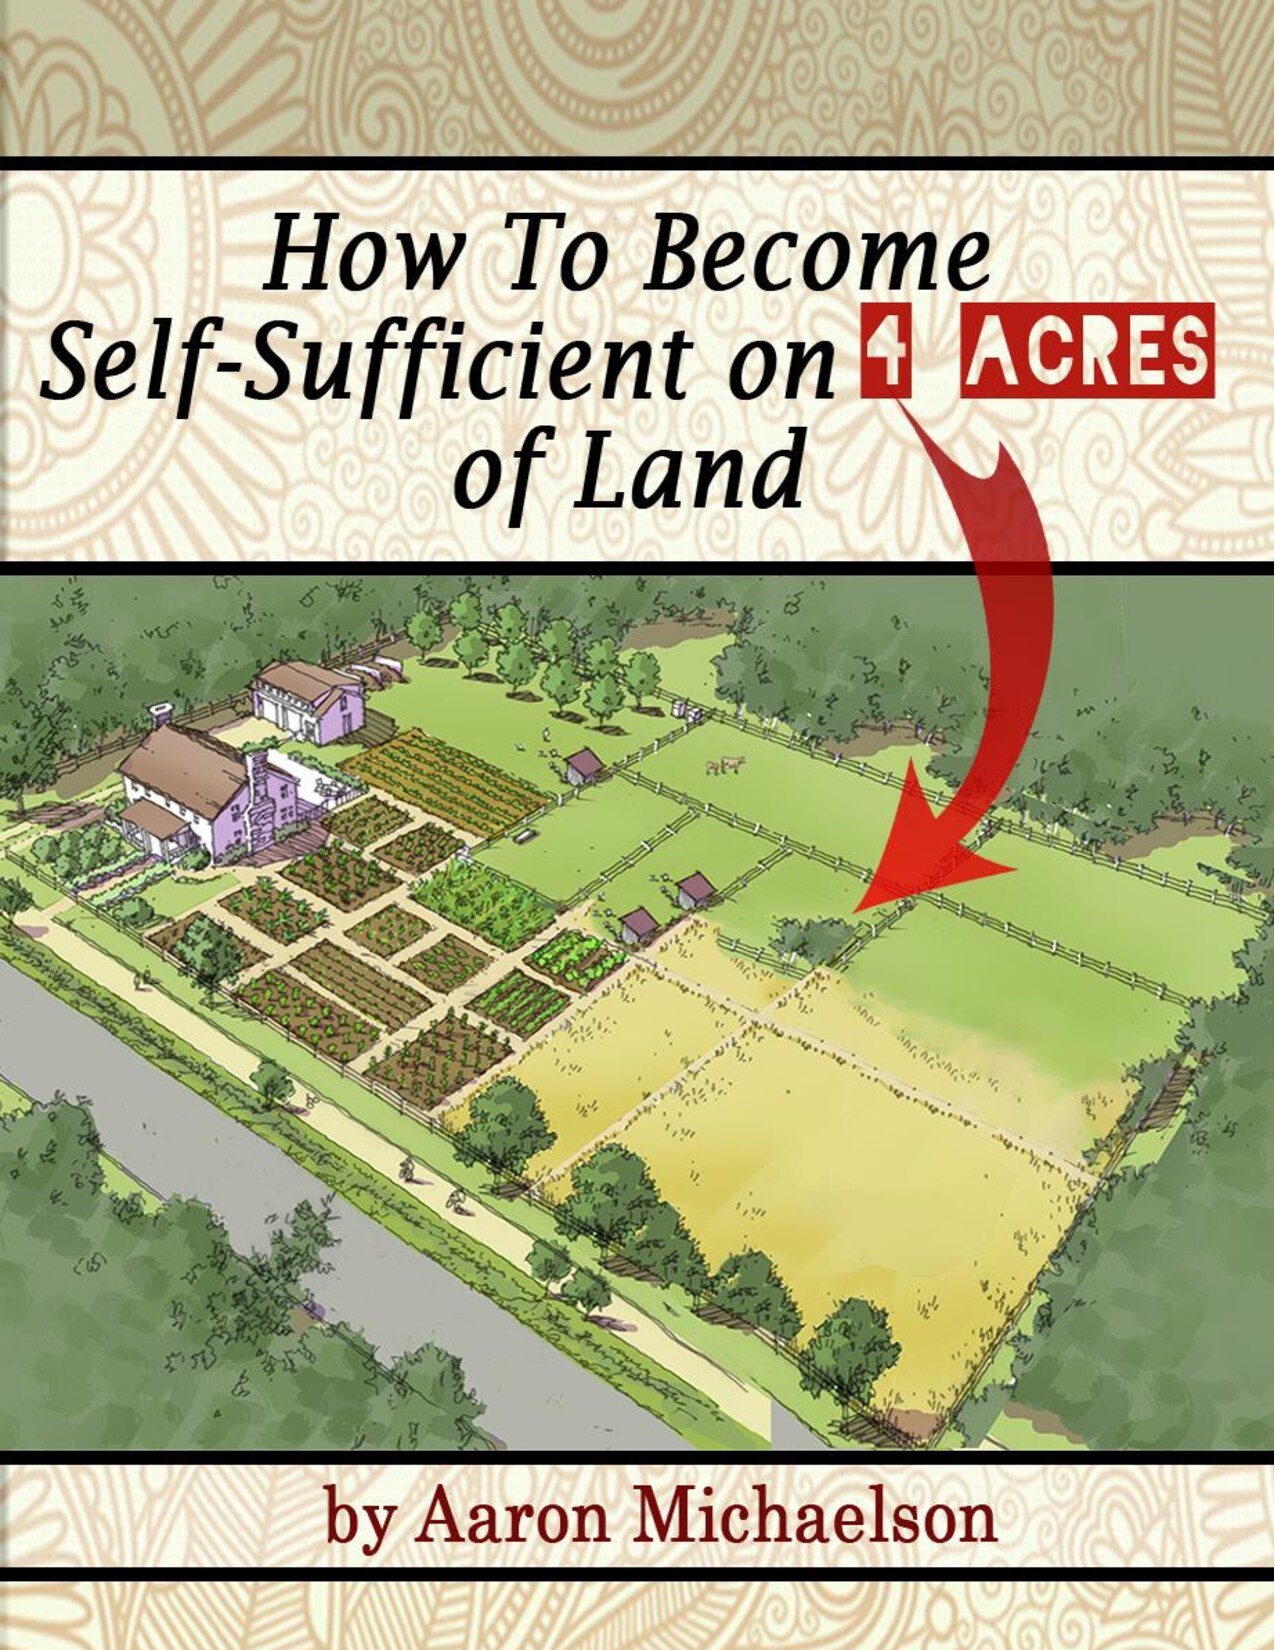 How to Create Your Own Self-Sufficient Farm on 4 Acres of Land